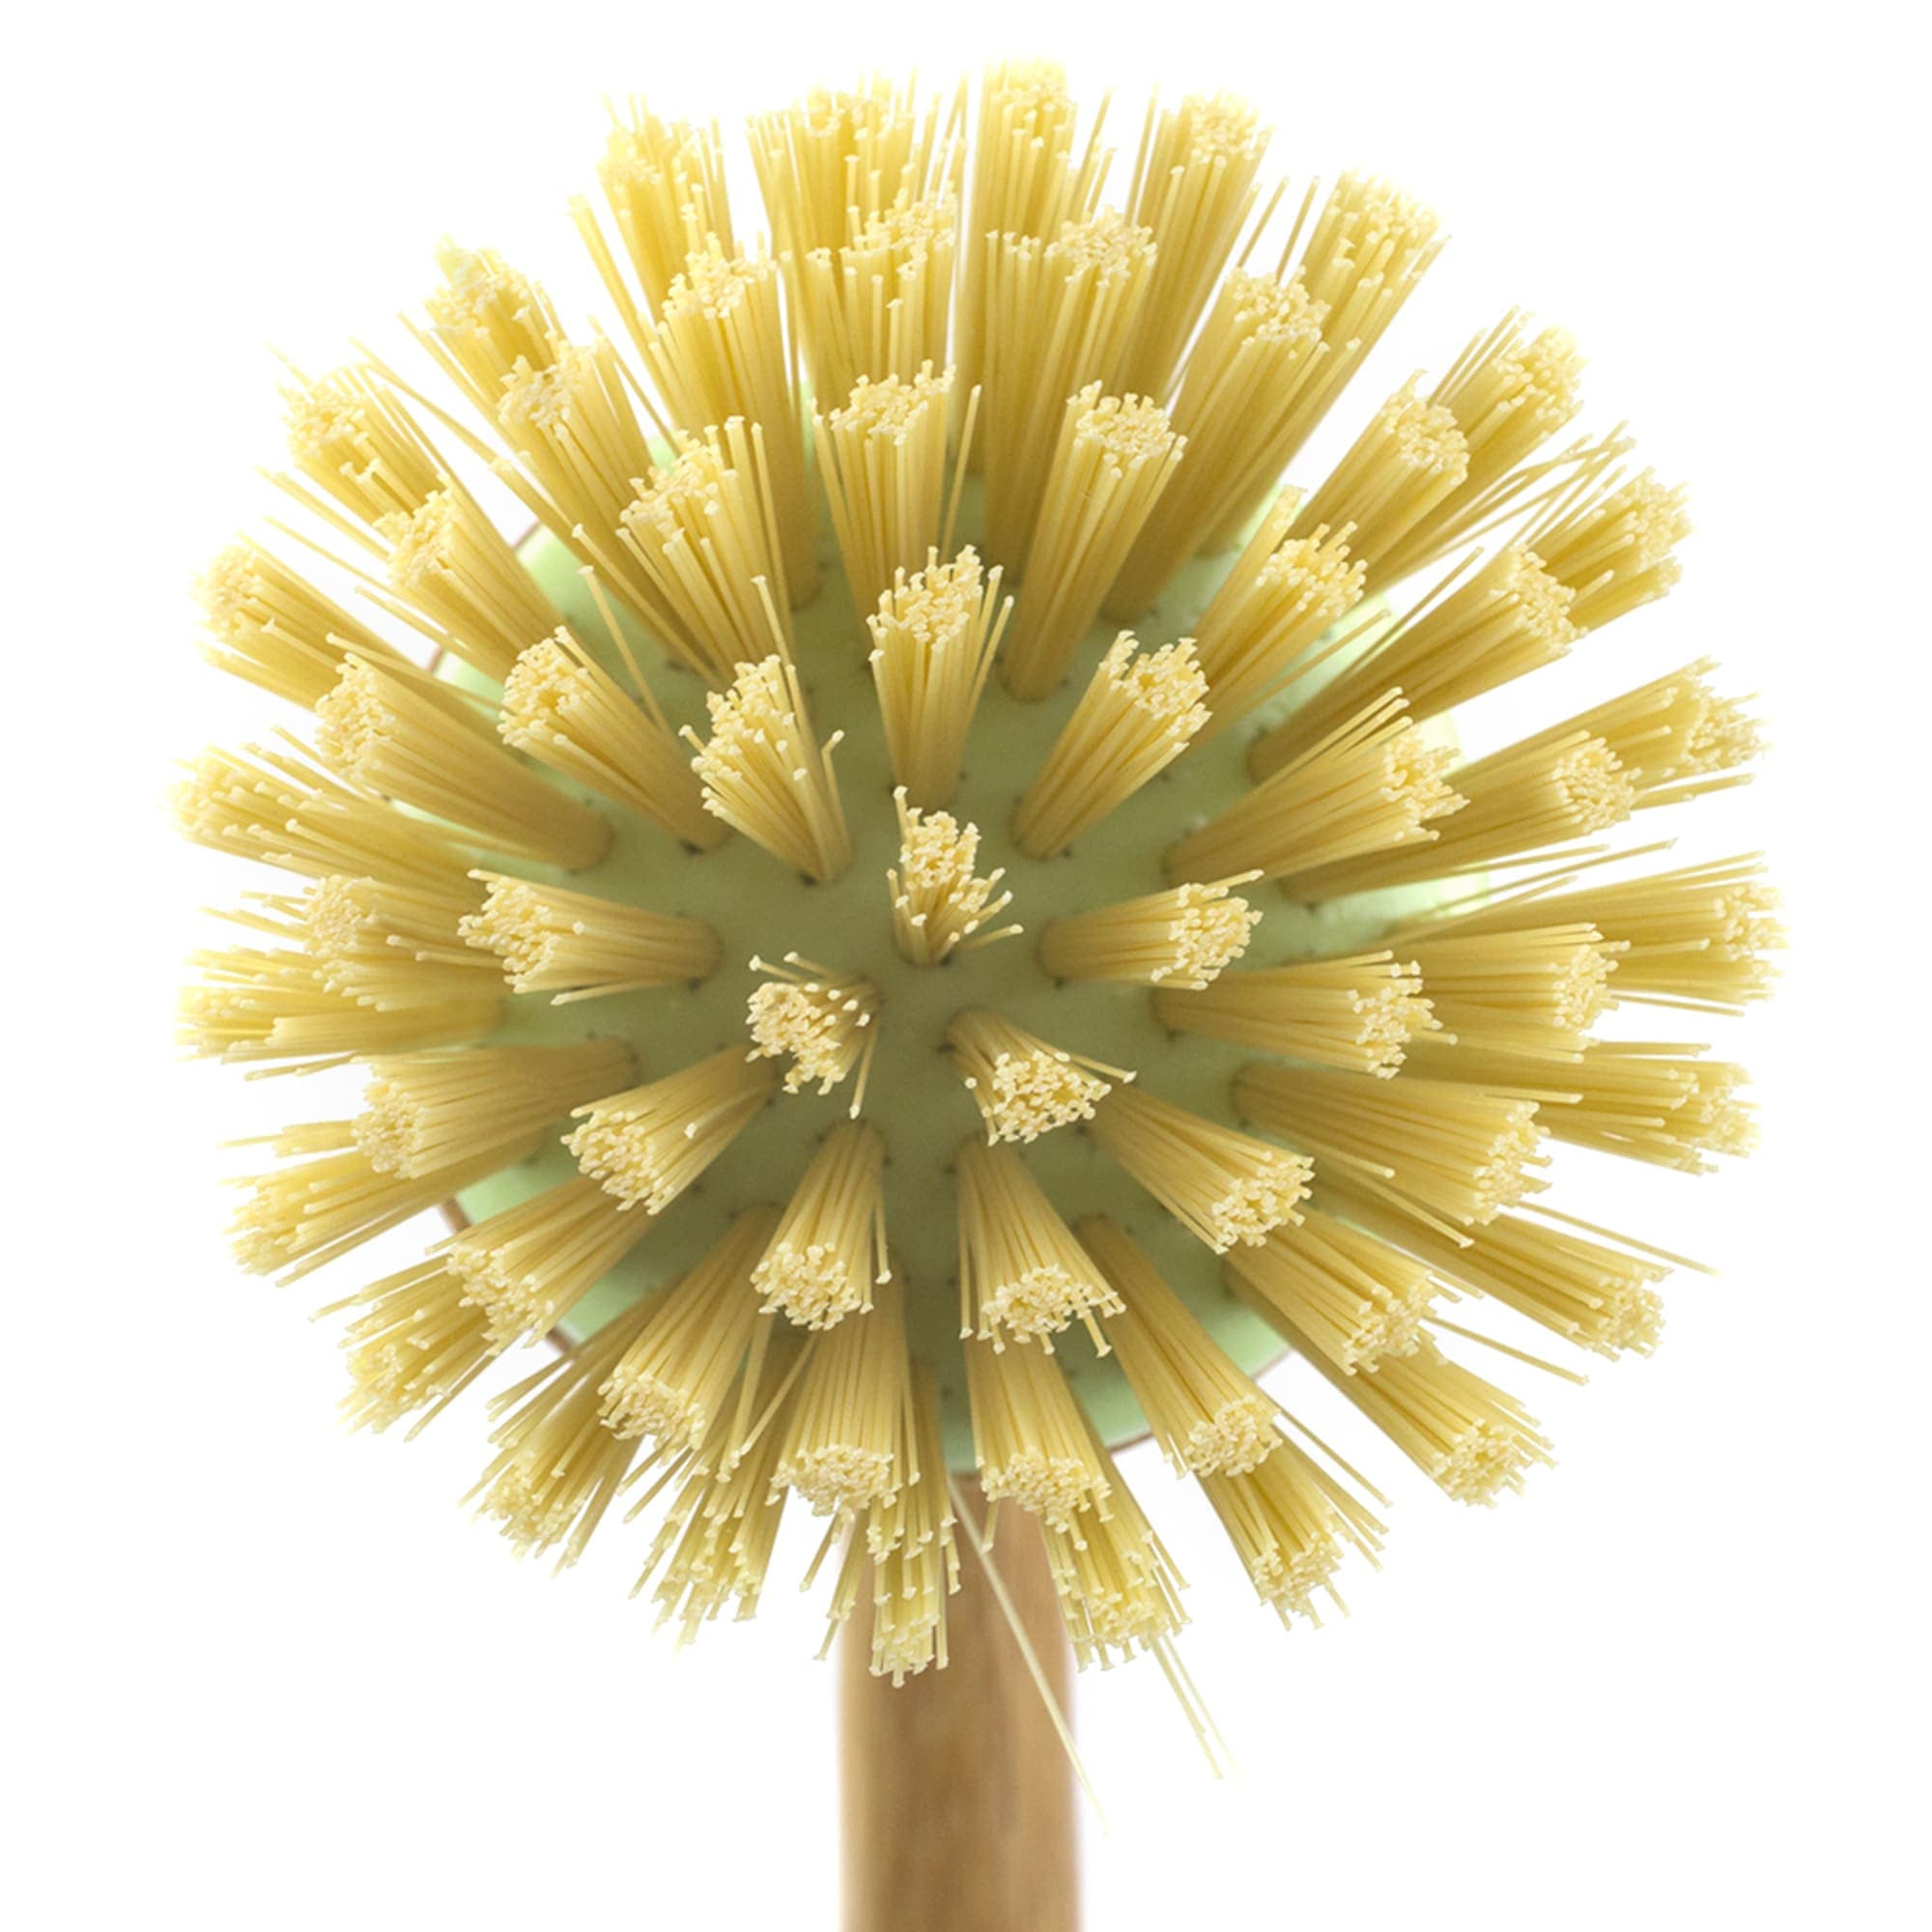 Home Basics Bliss Collection Bamboo Dish Brush, Green $3 EACH, CASE PACK OF 12